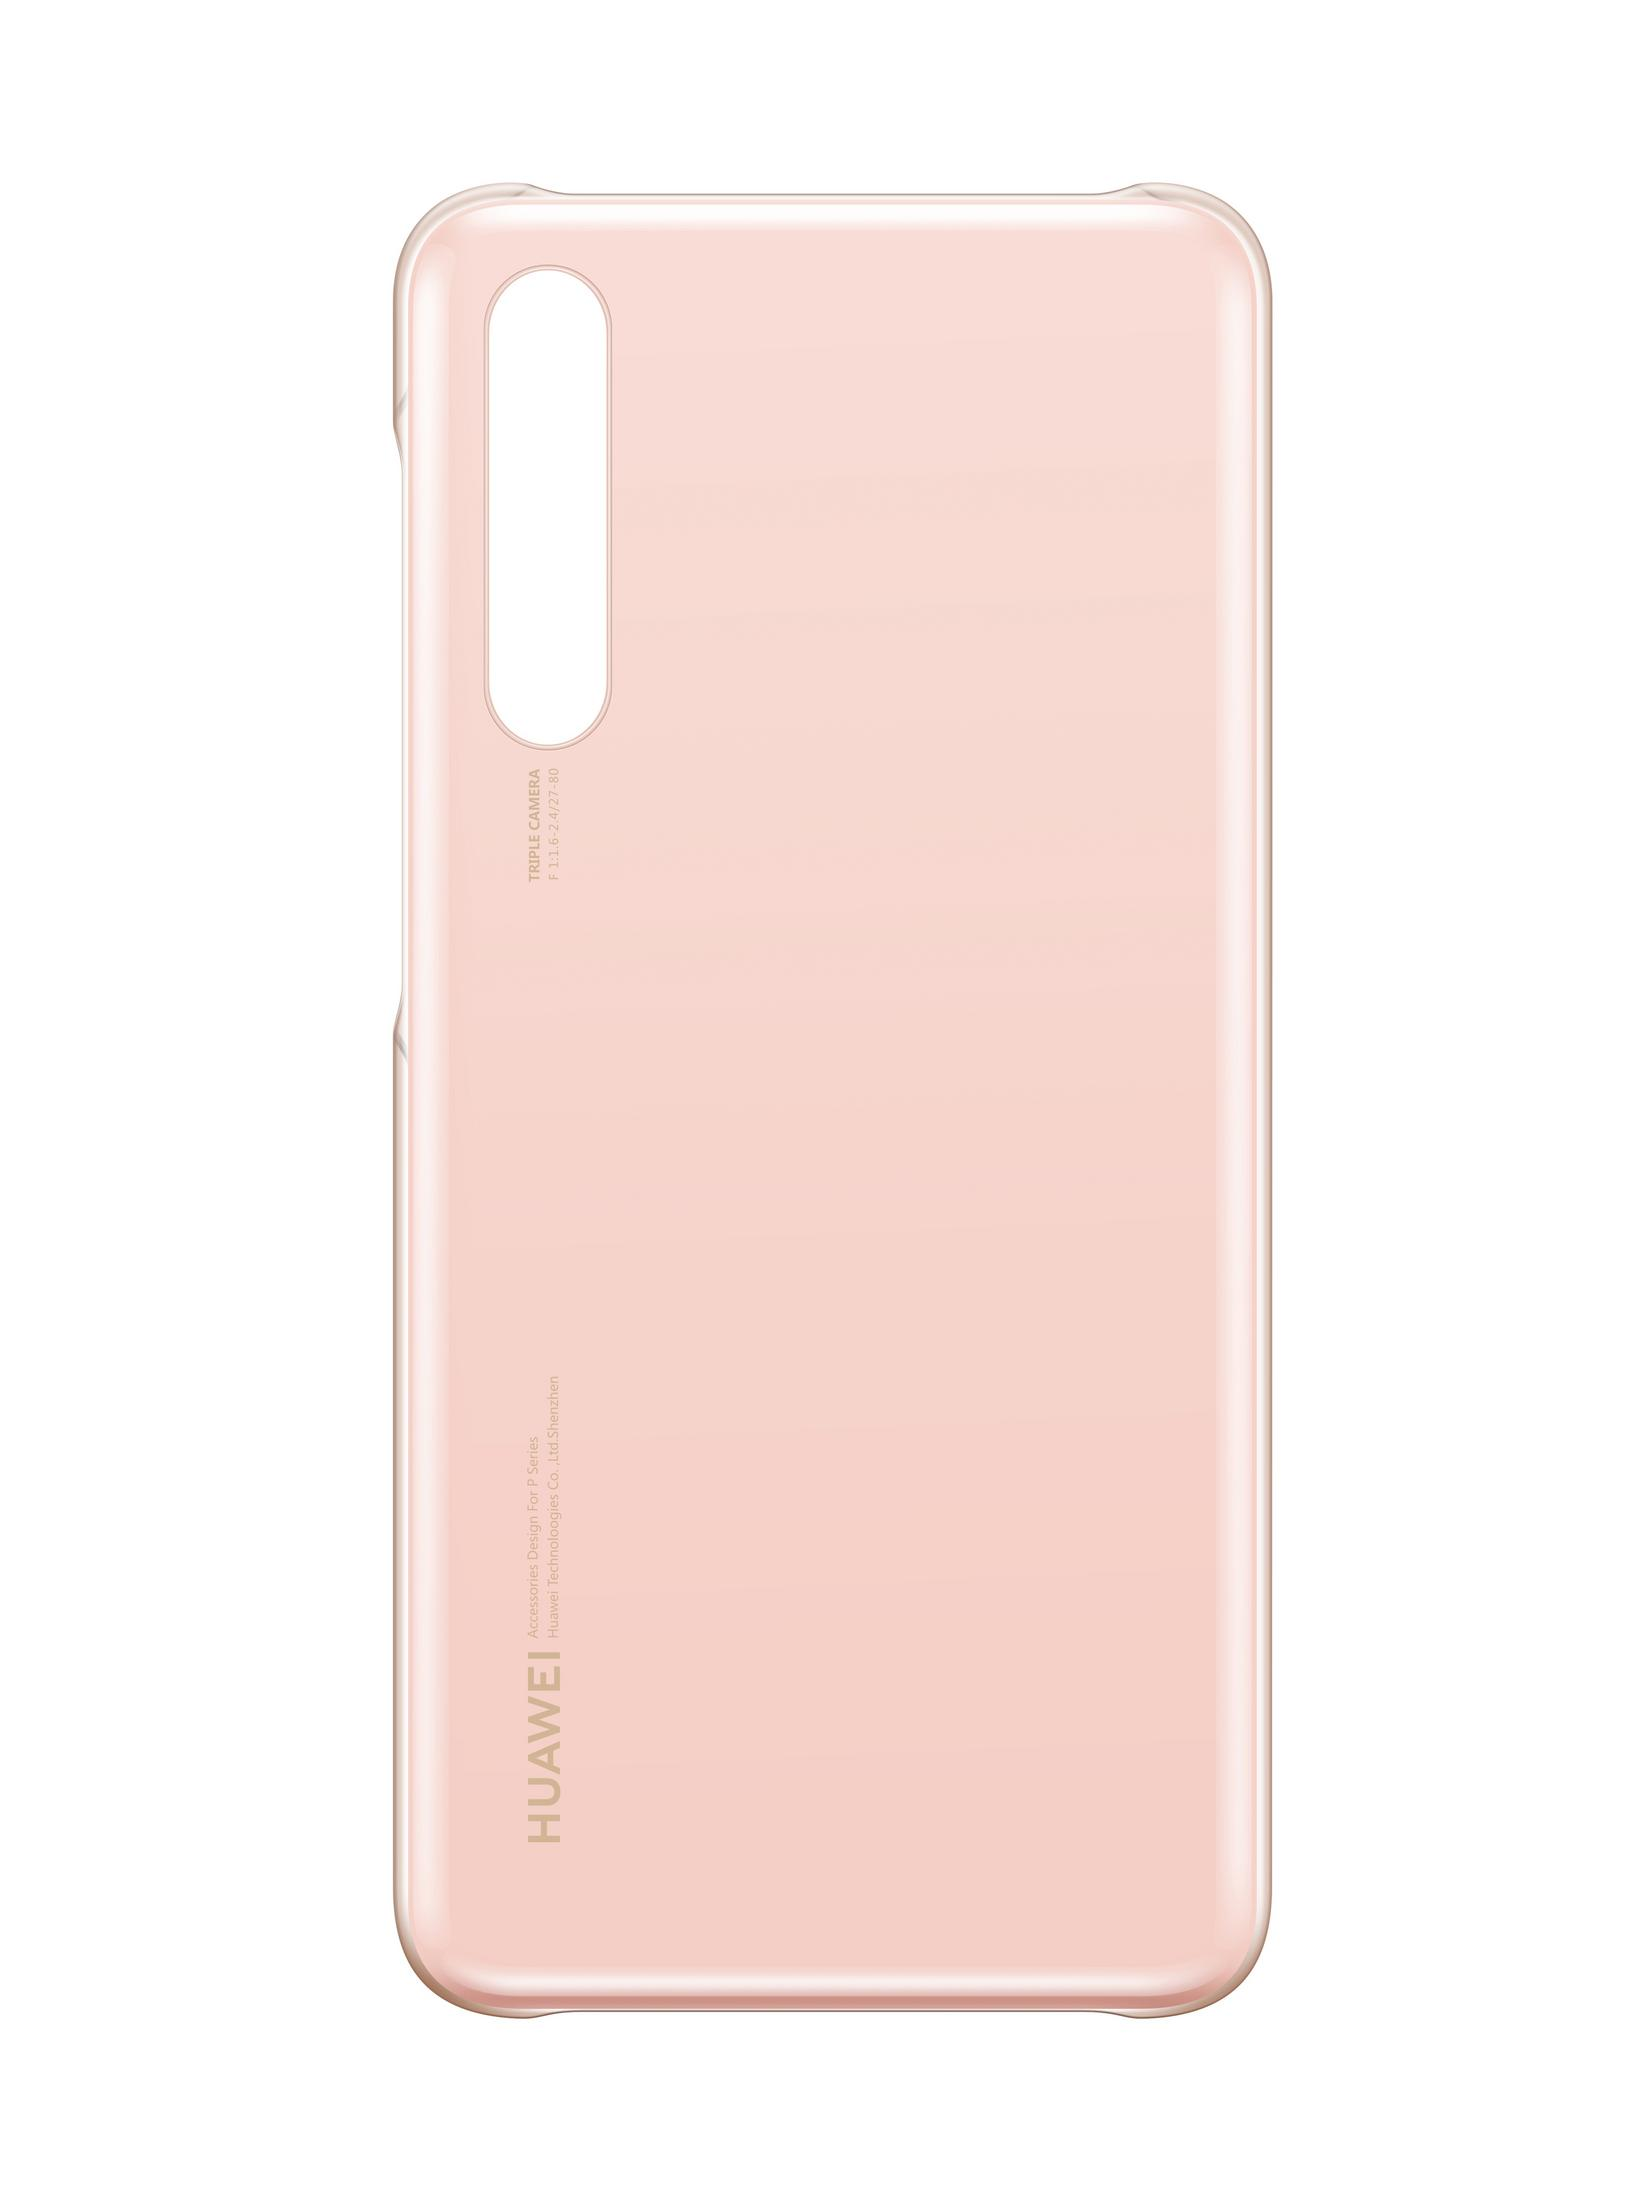 Huawei, COLOR 51992376 CASE P20 Pro, Pink Backcover, PINK, P20 HUAWEI PRO